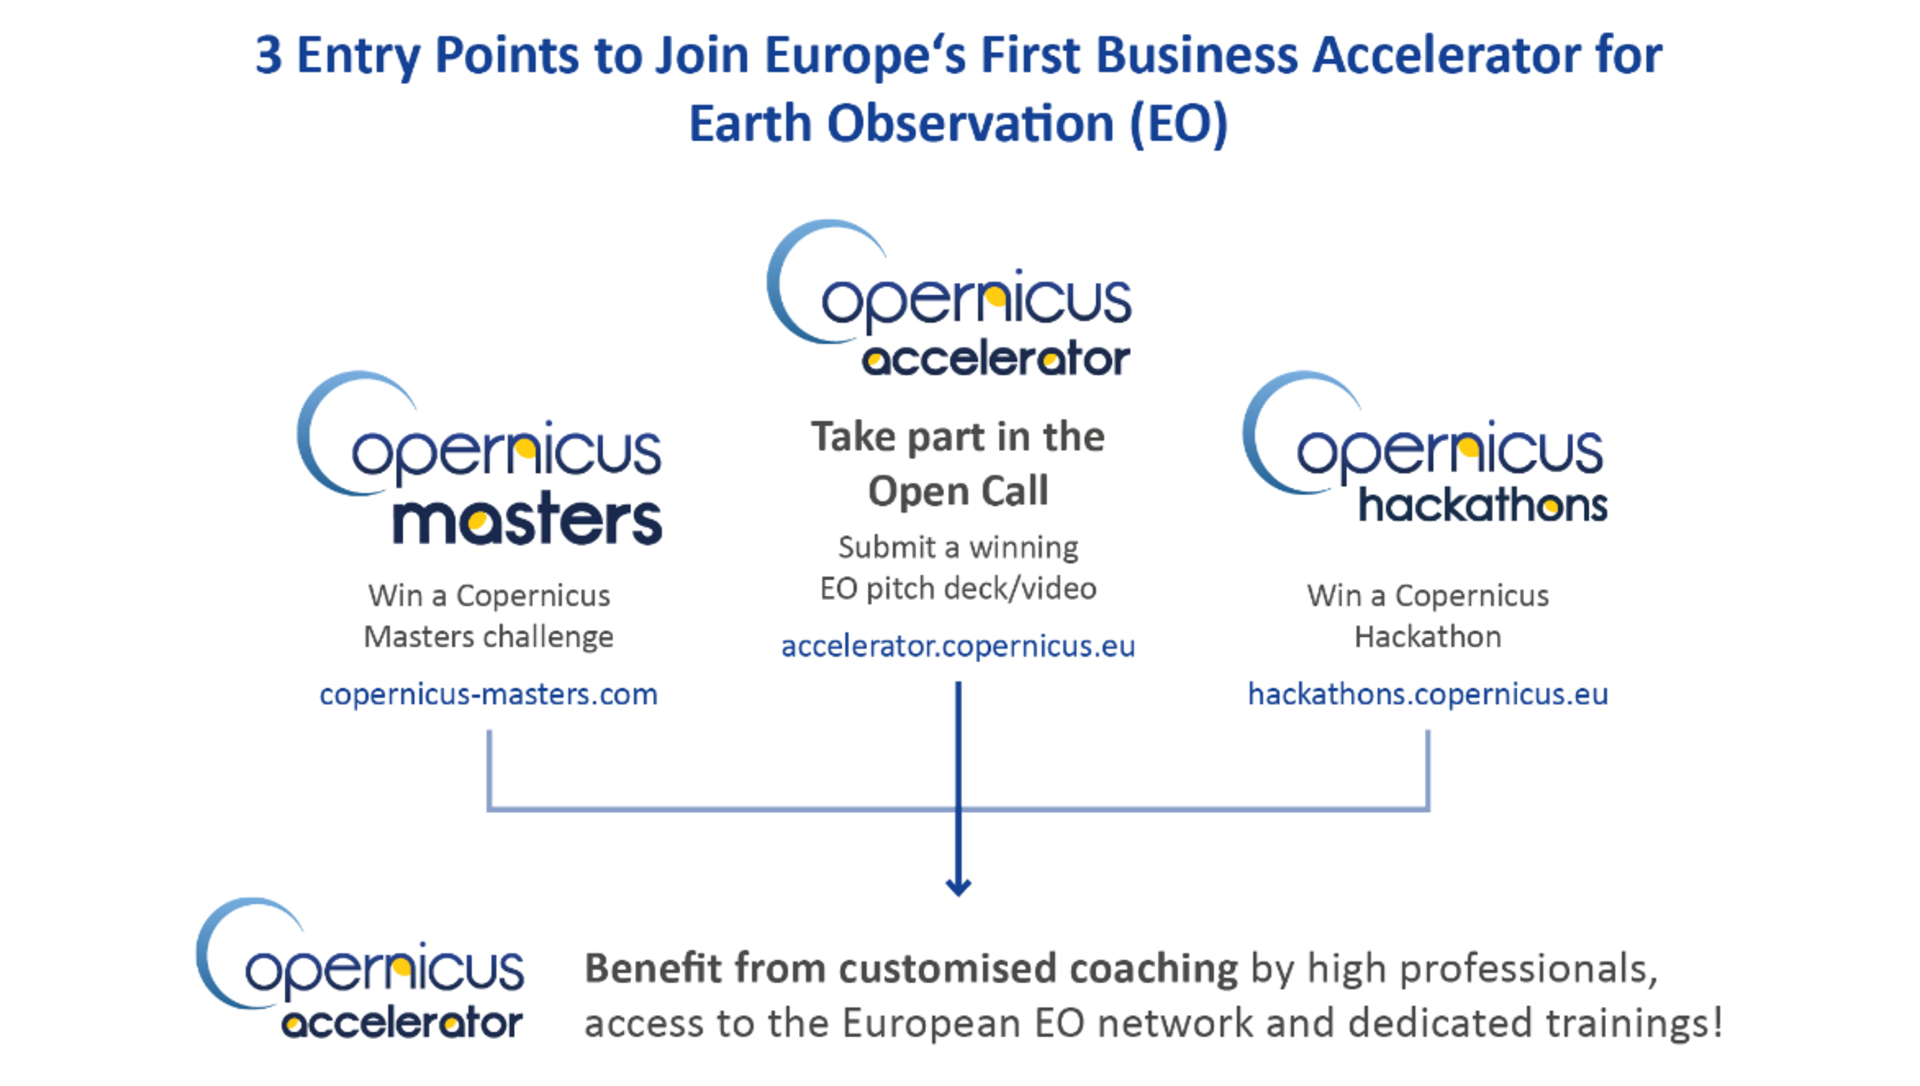 The three ways to access the Copernicus Accelerator 2018 programme